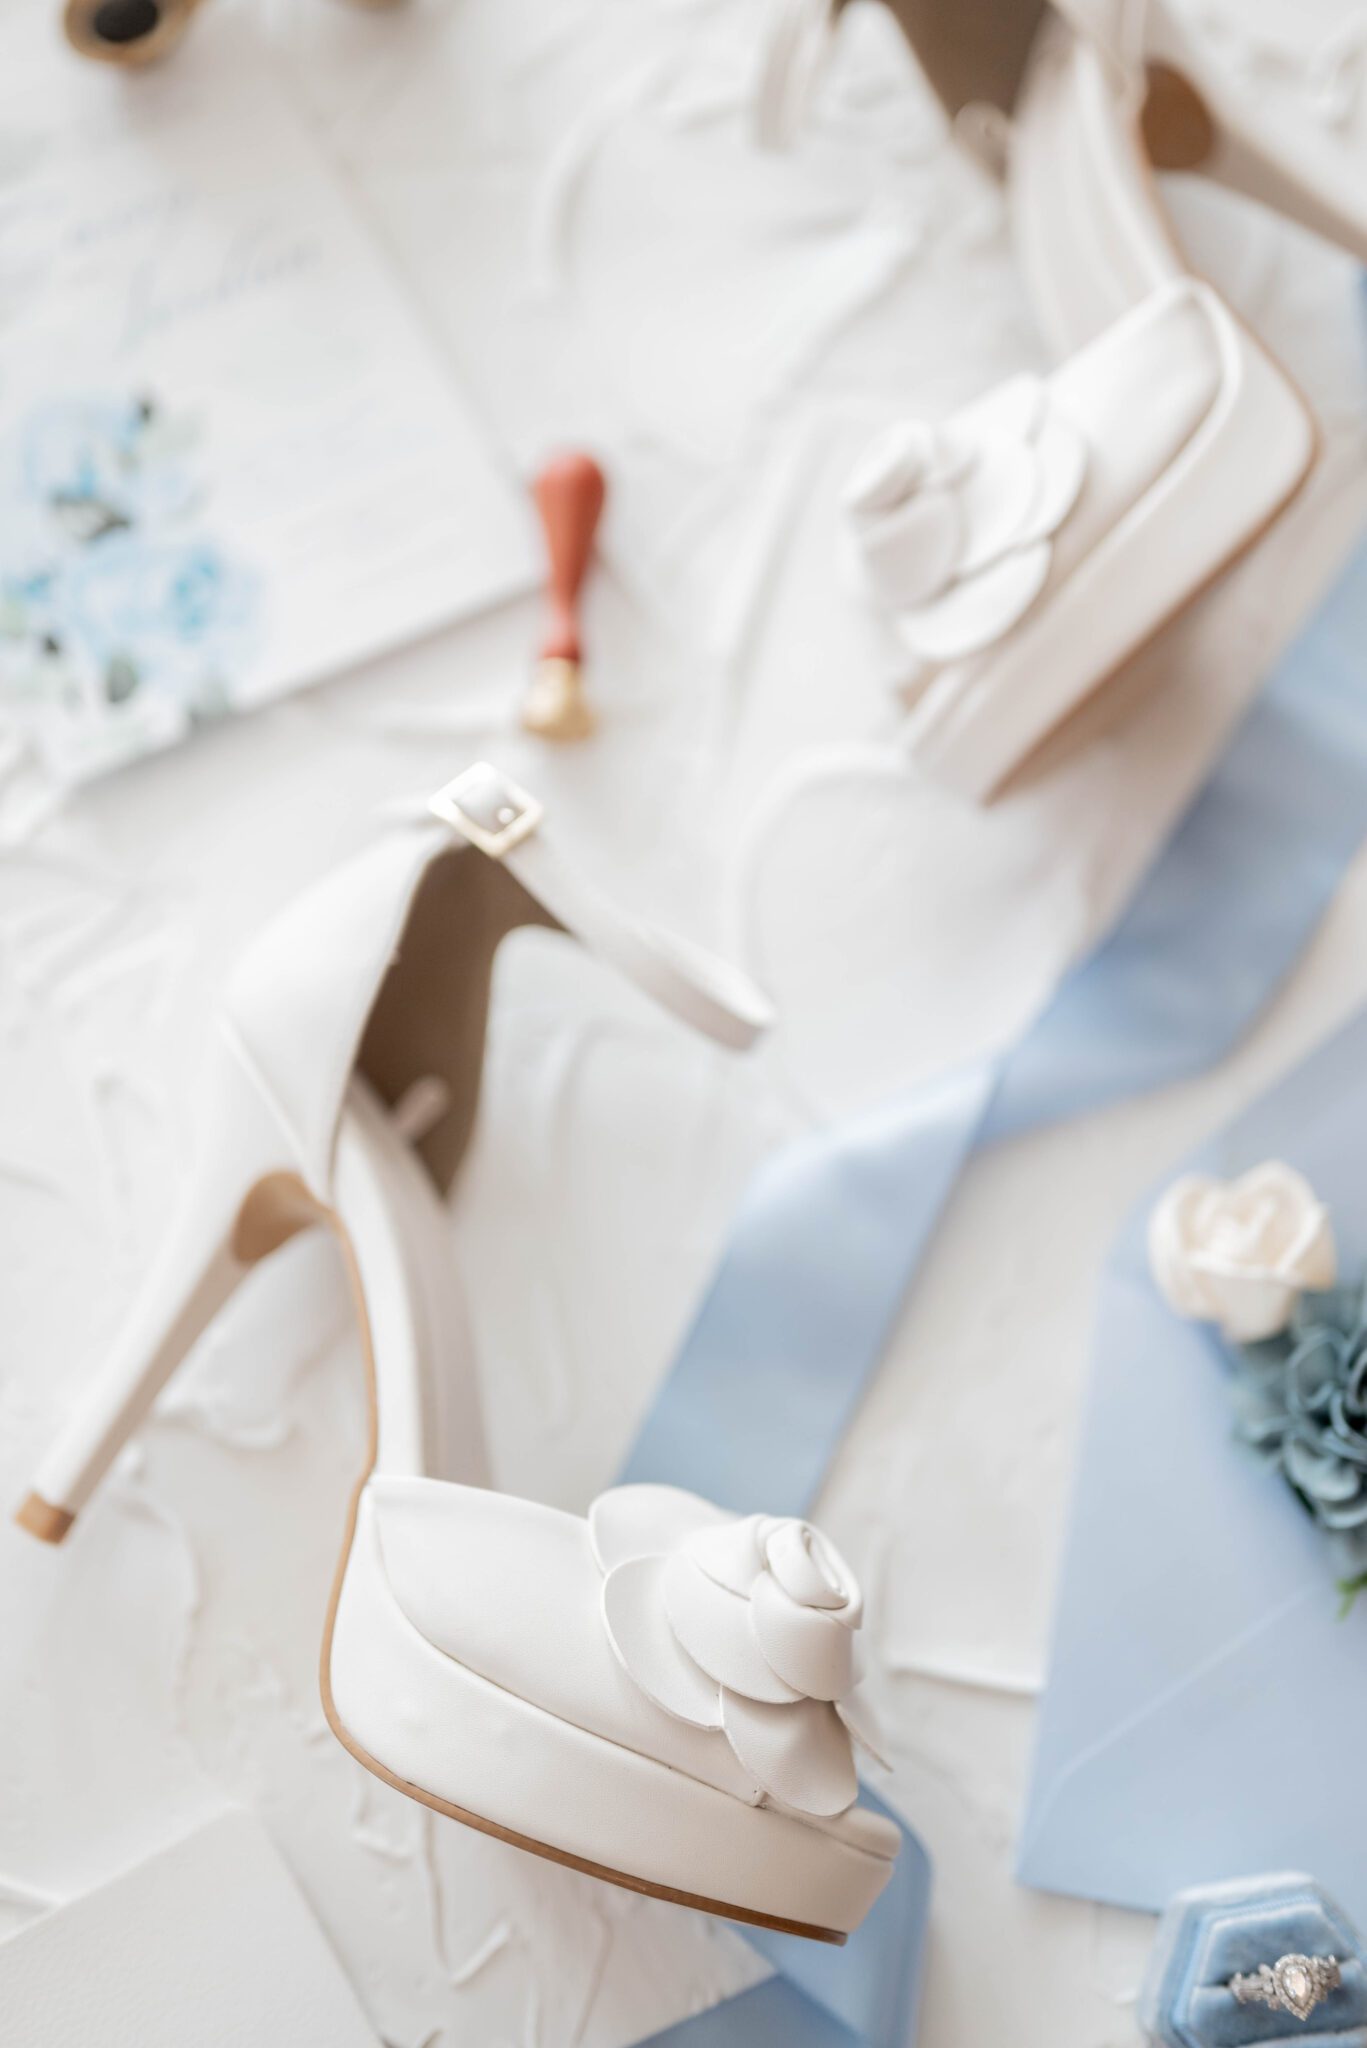 retro white leather bridal heels with large flower on the open toed pump, wedding detail photo inspiration 